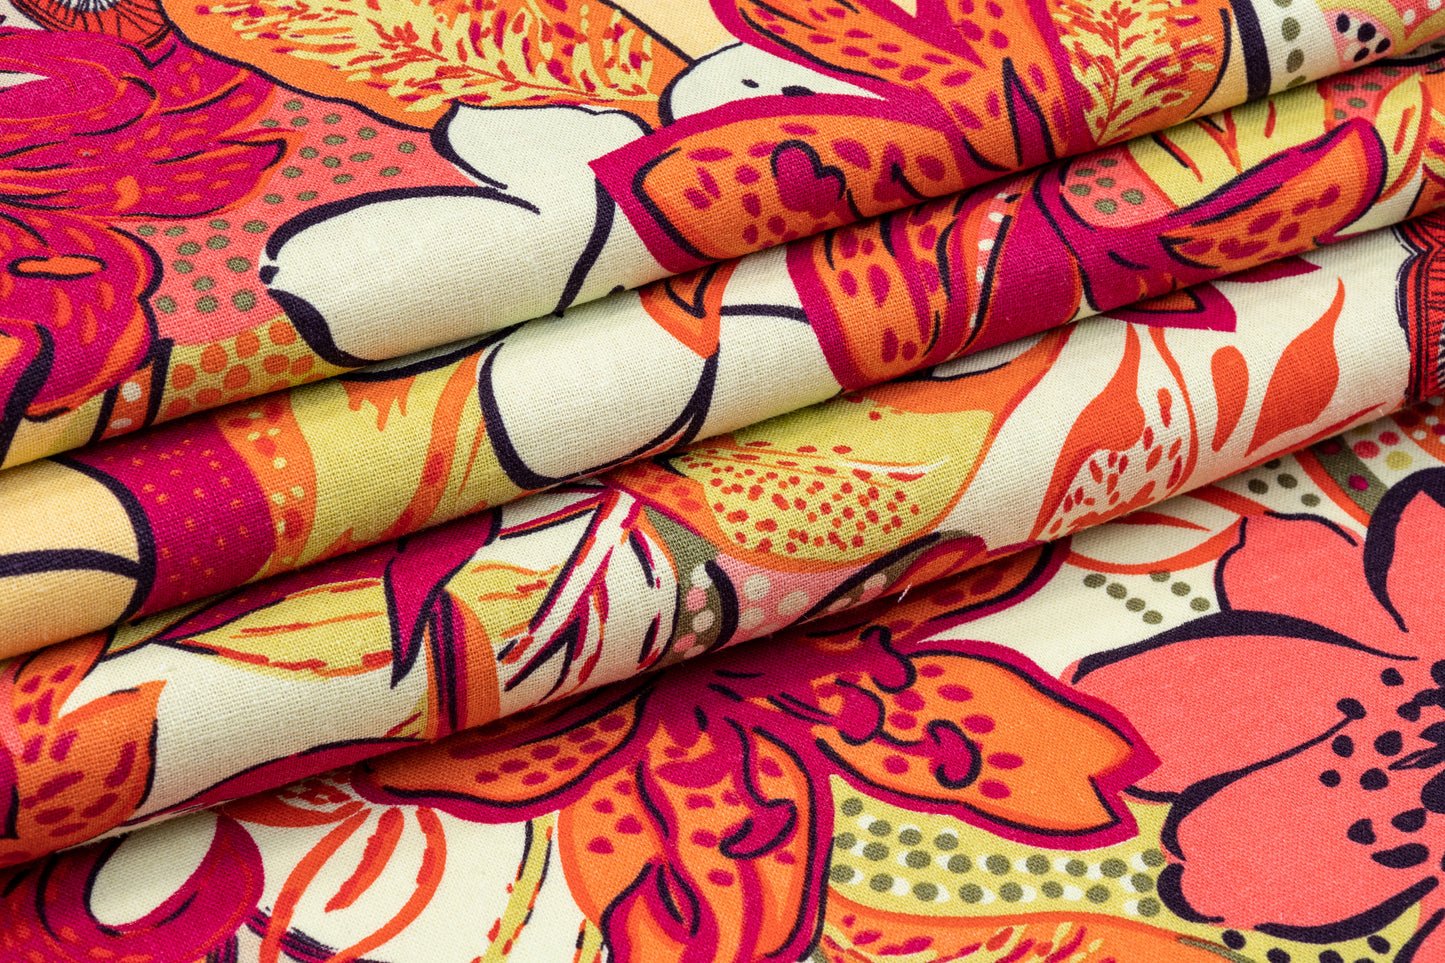 Floral Cotton and Linen Blend - Red, Orange, Yellow